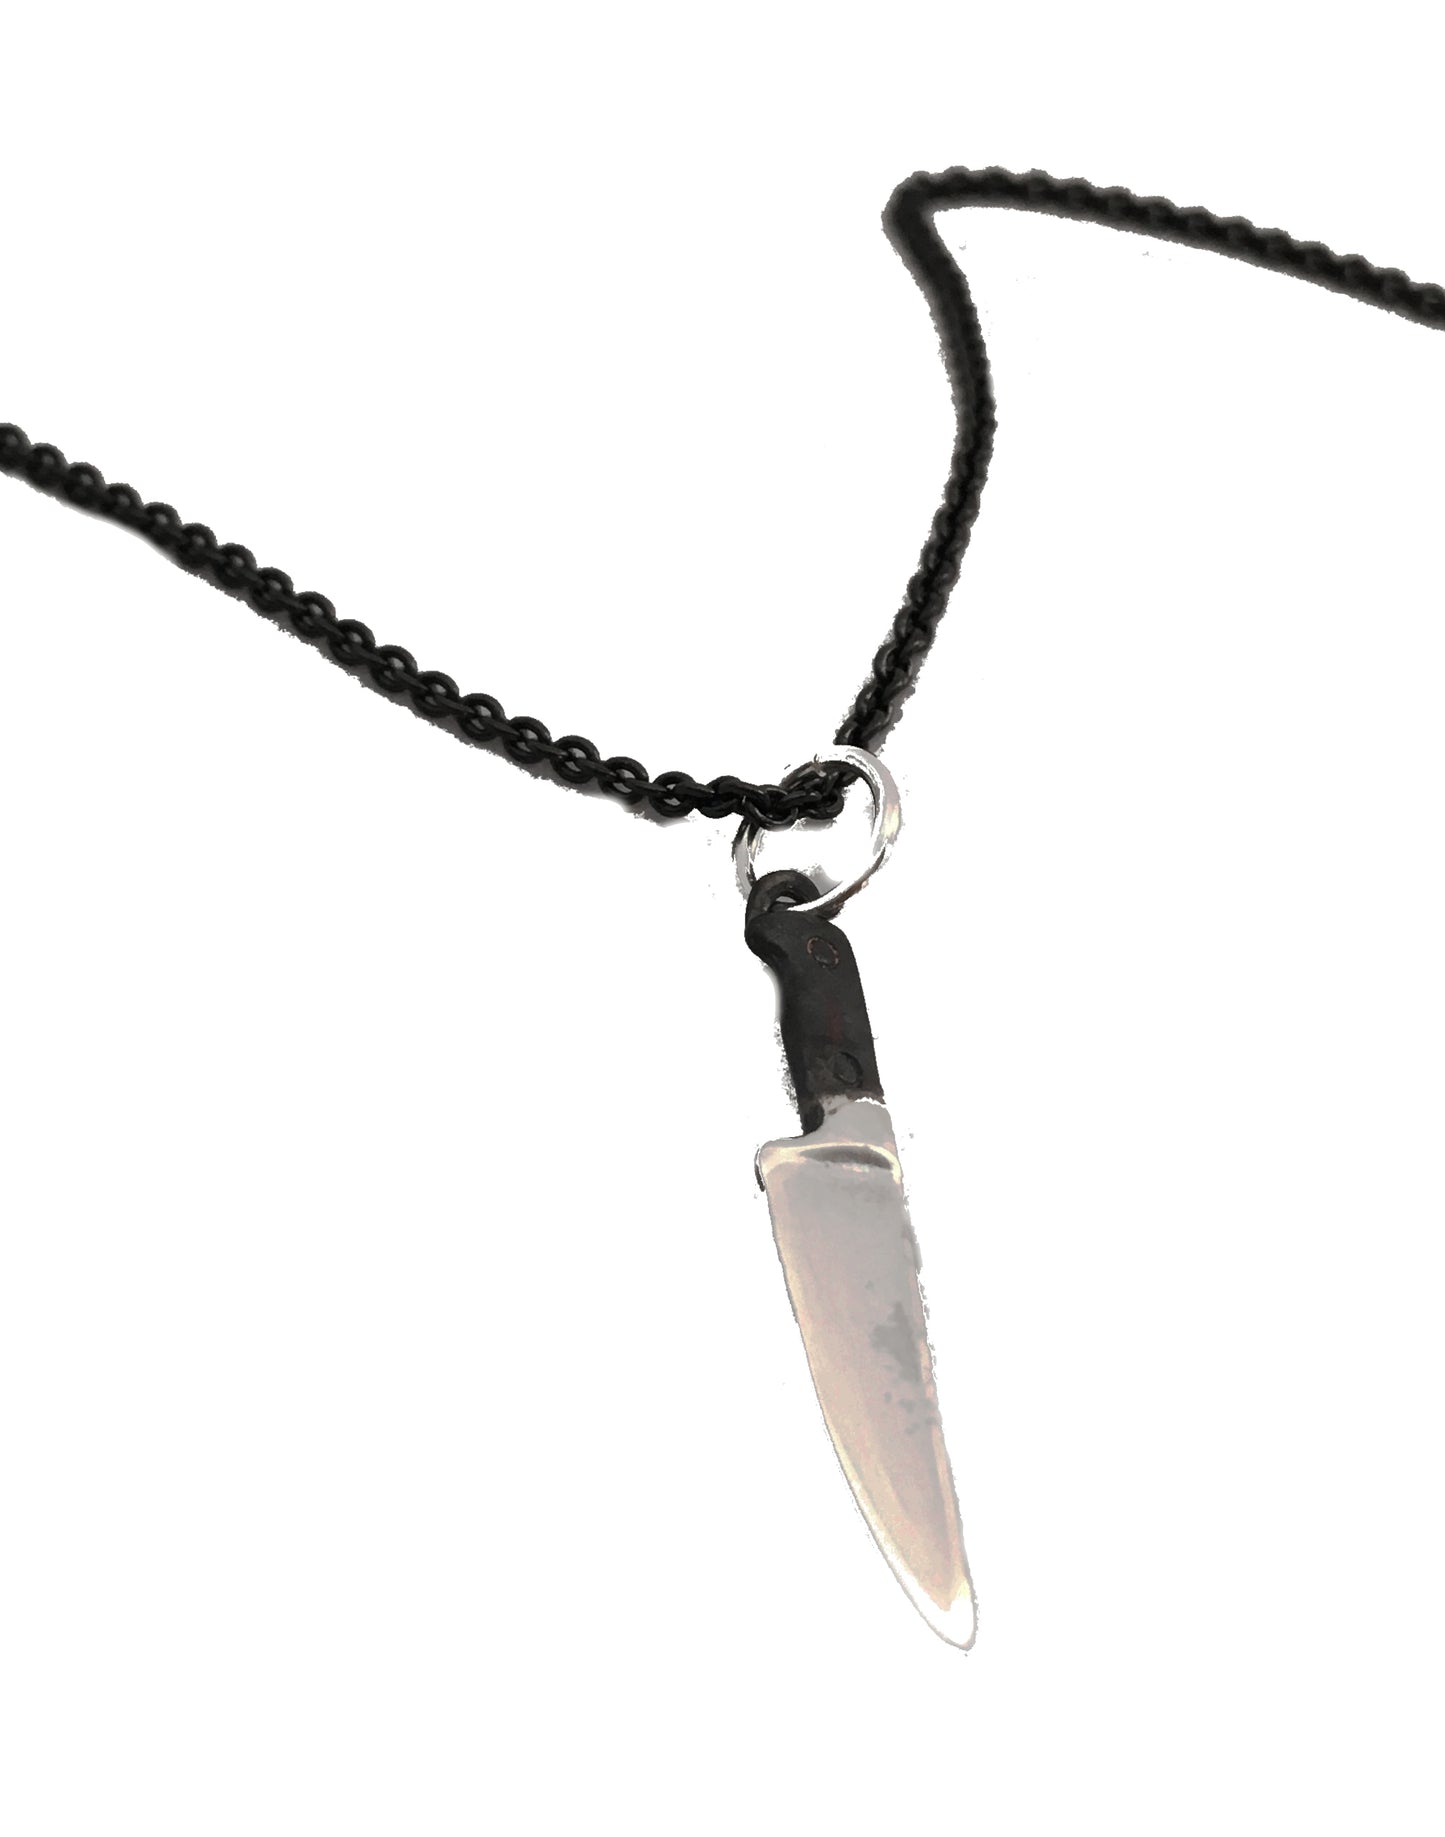 chef knife necklace with black handle on black sterling silver chain